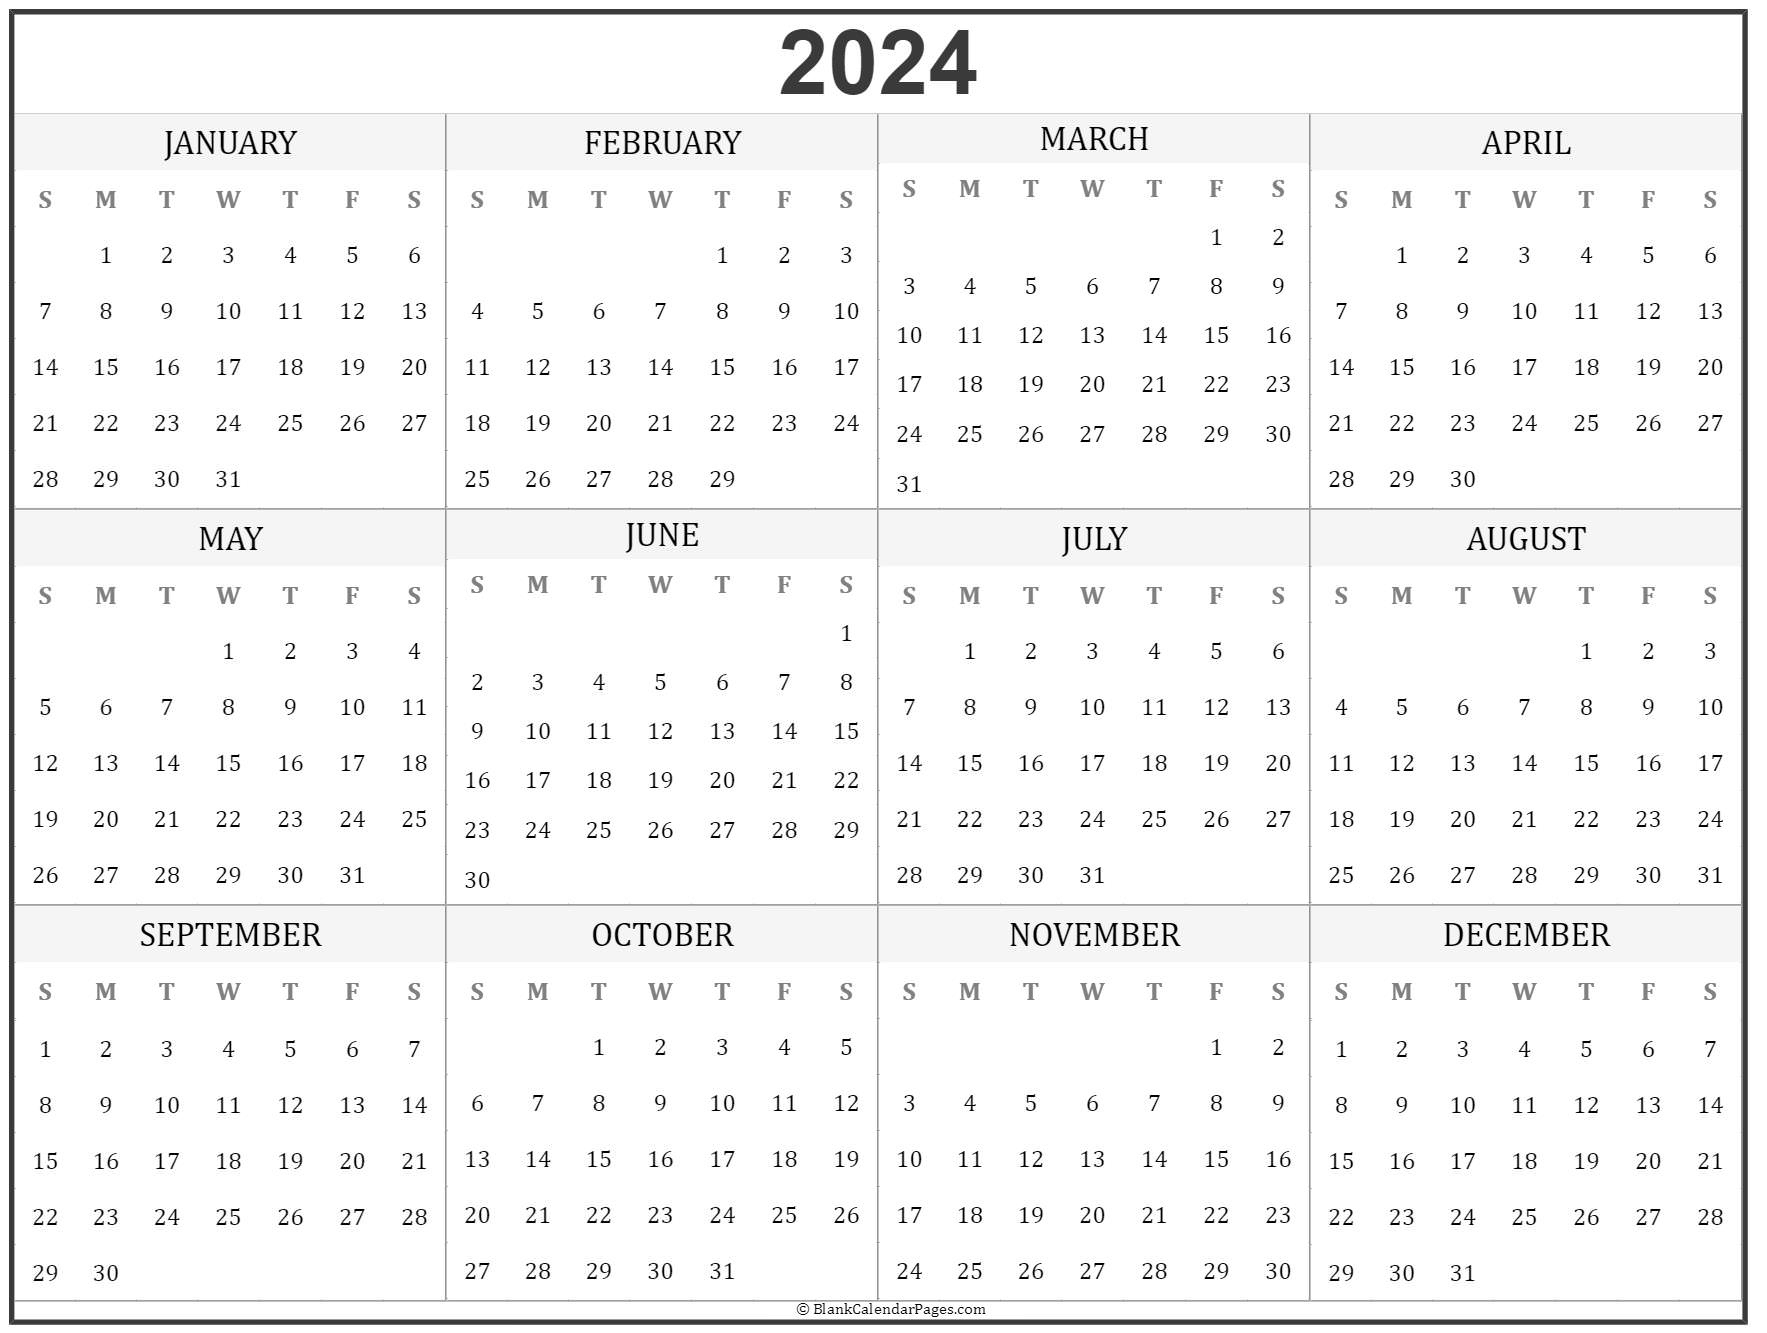 2024 Year Calendar | Yearly Printable | Yearly Overview Calendar 2024